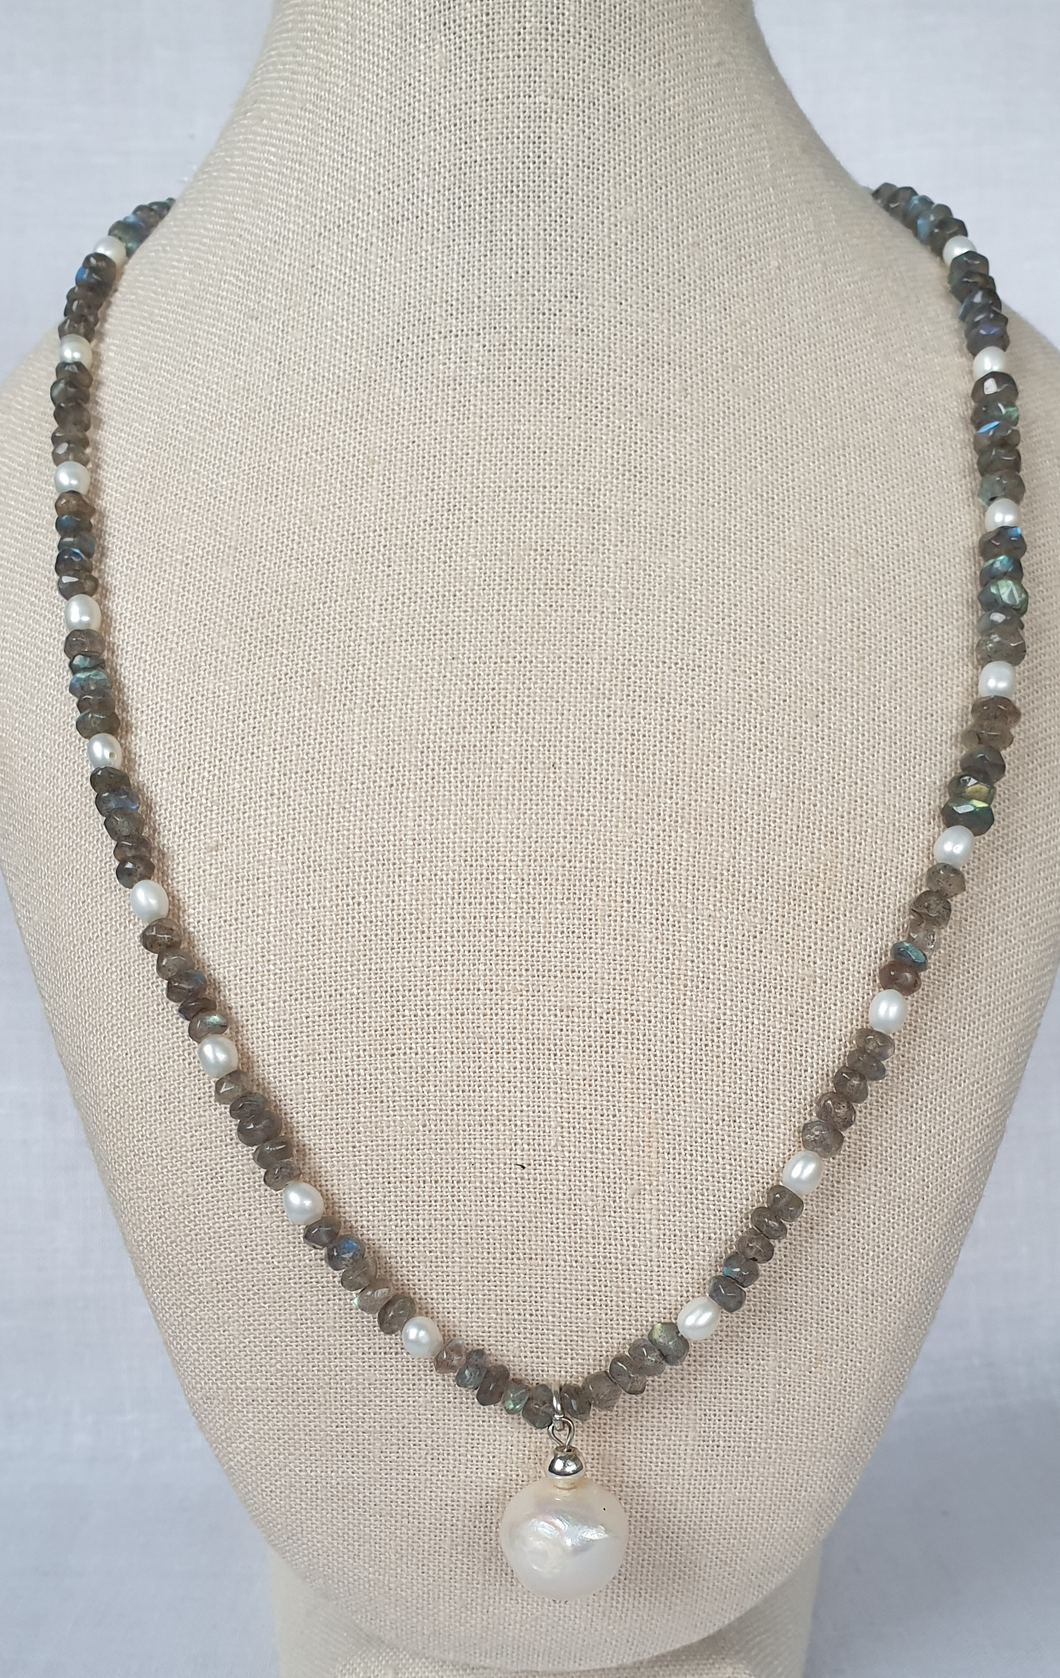 Labrodite necklace